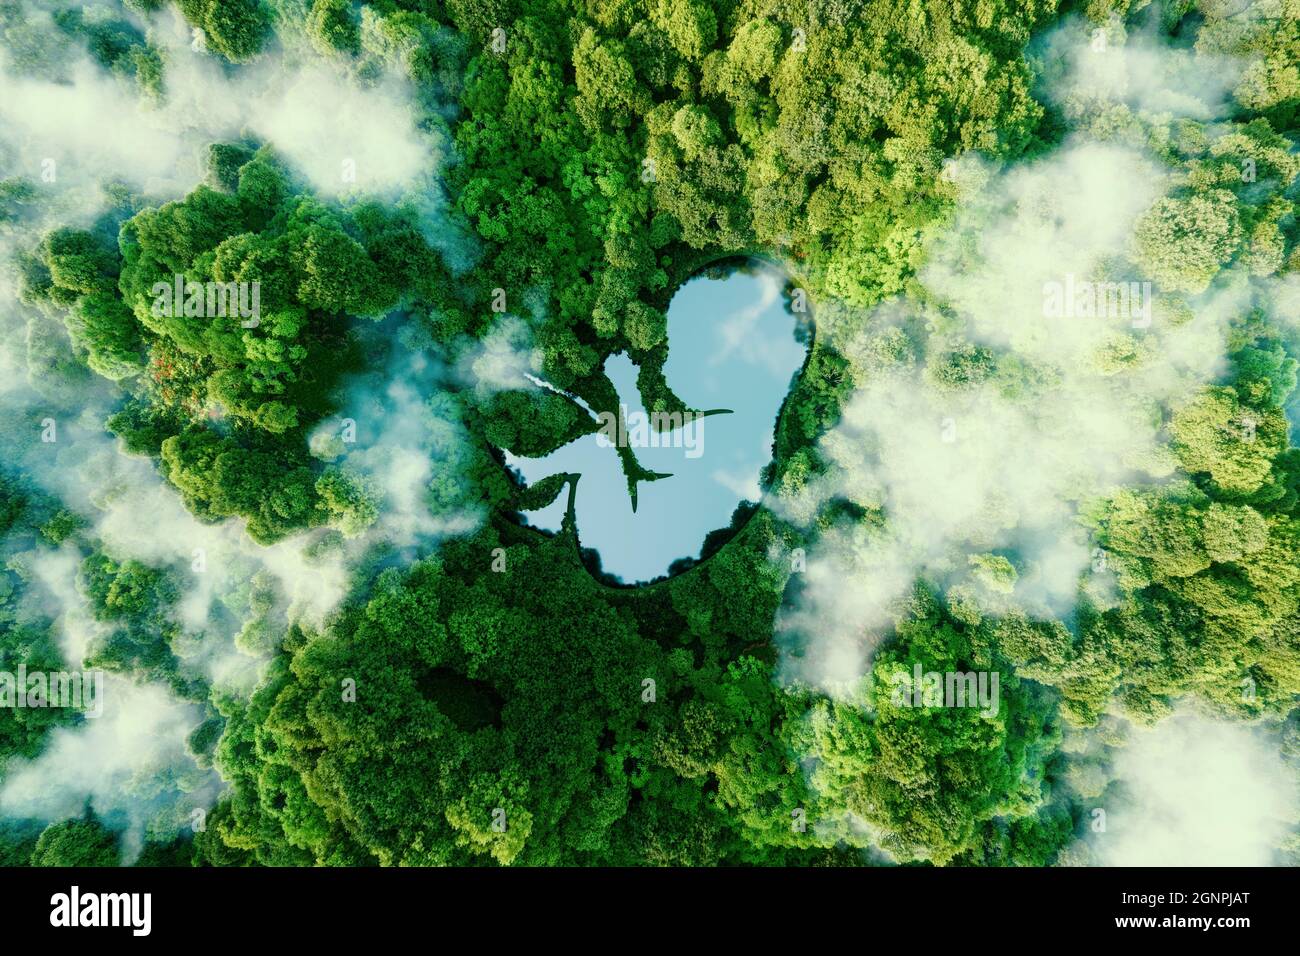 Concept depicting the self-renewing processes of nature and new life in general in the form of an embryo-shaped lake in the middle of a pristine fores Stock Photo